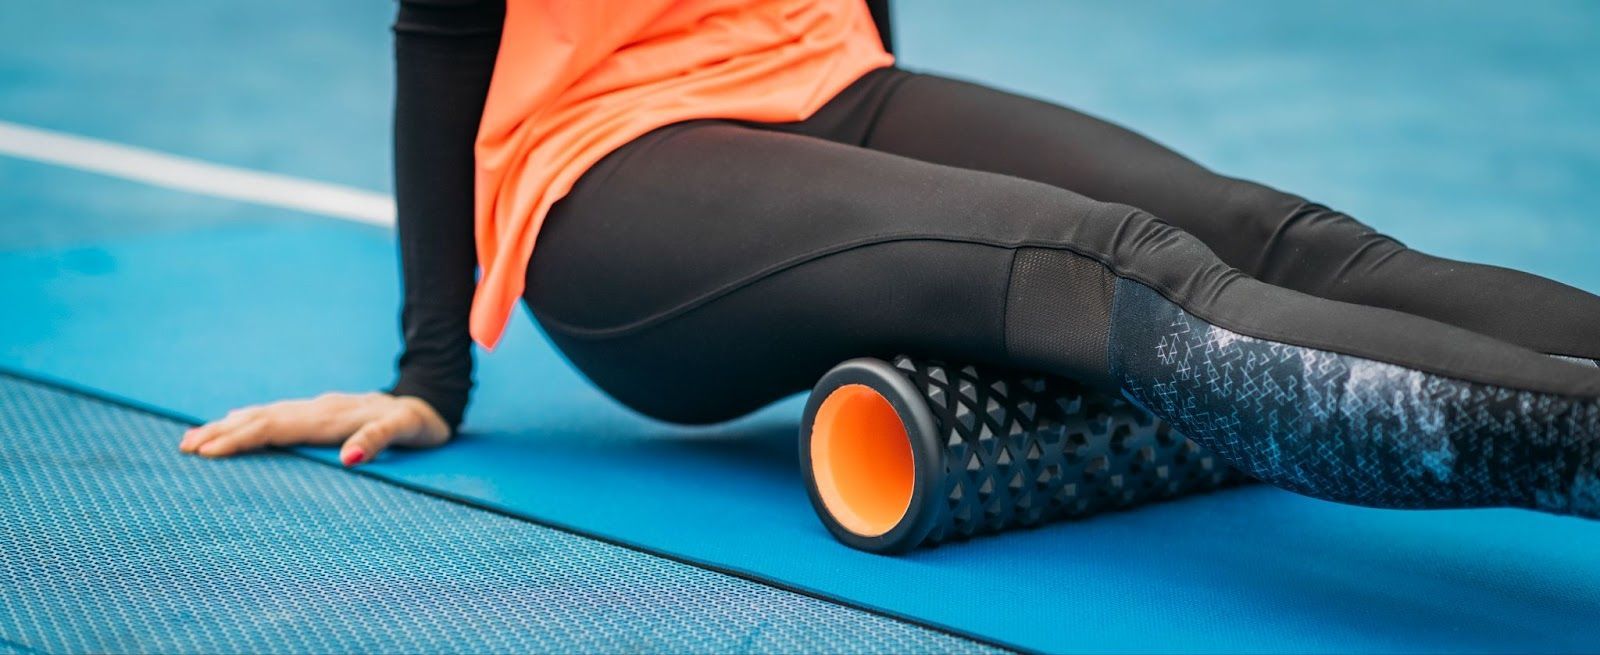 An unidentified female athlete in black and orange gear uses a foam roller for stretching exercises.
